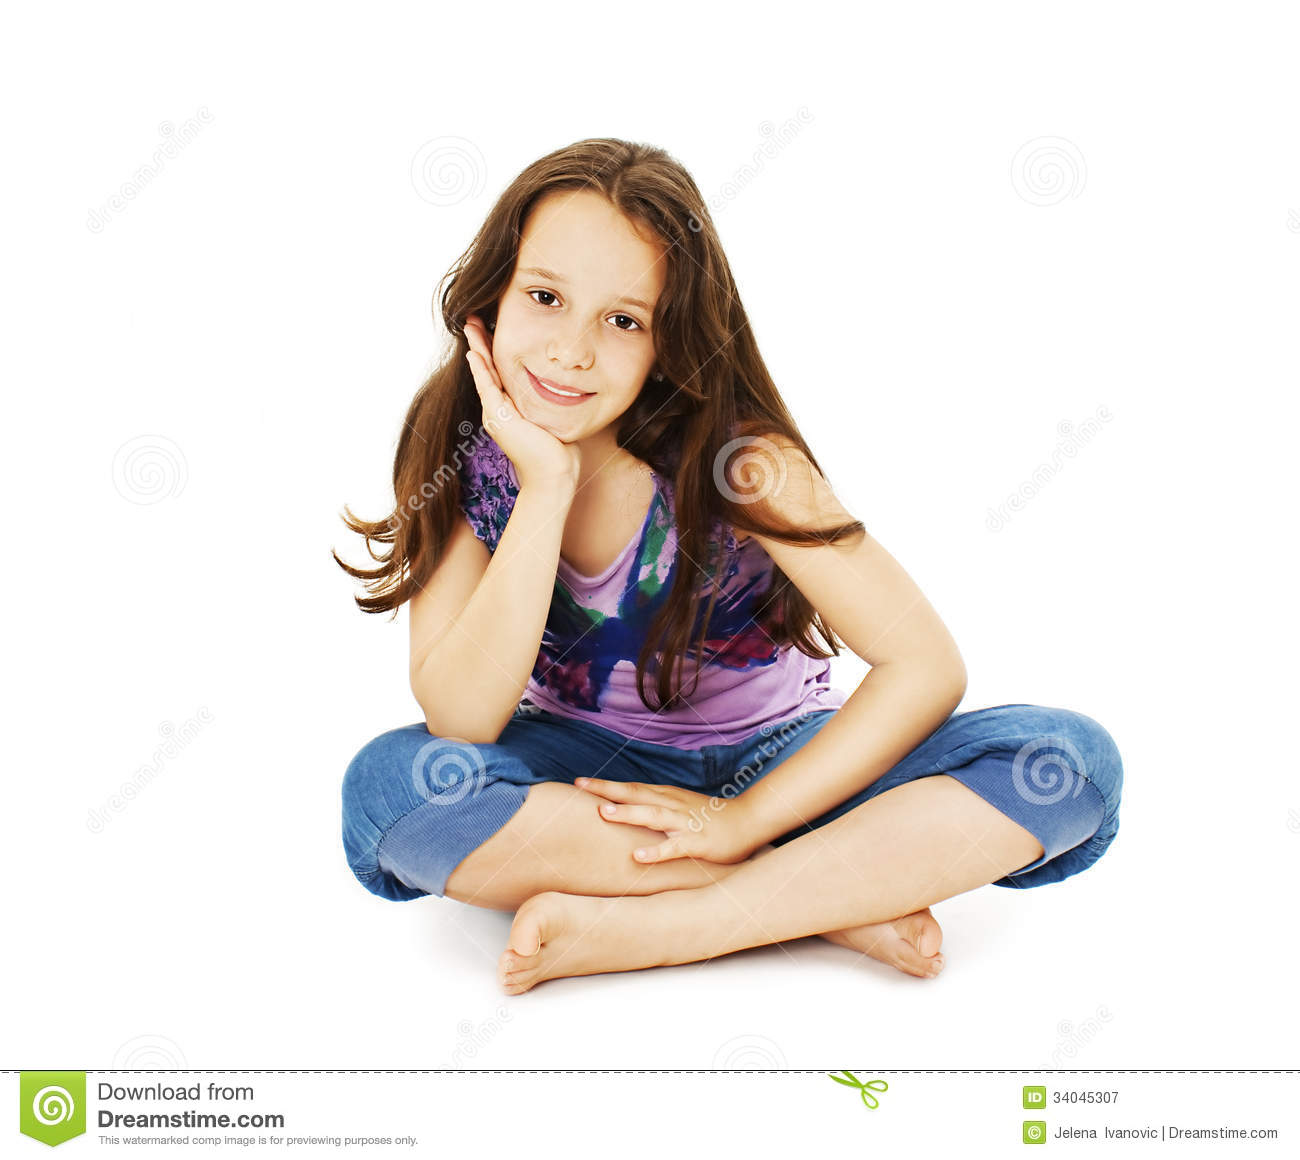 Pretty Little Girl Sitting On The Floor In Jeans Royalty Free Stock